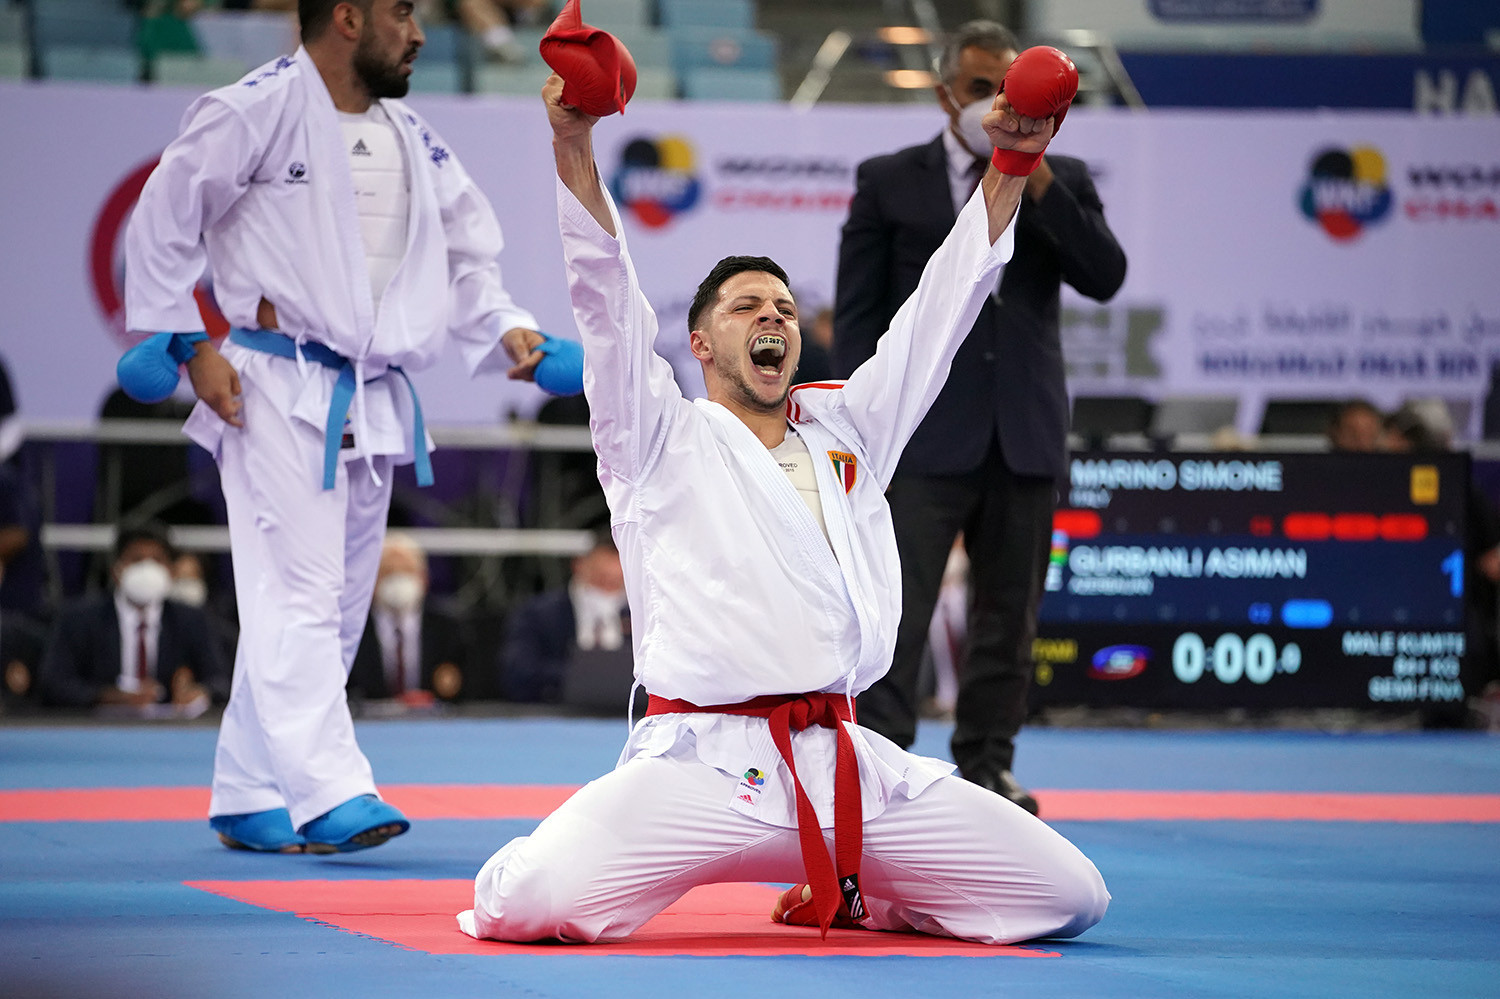 Simone Marino of Italy reached the final of the men's heavyweight over-84kg category ©WKF